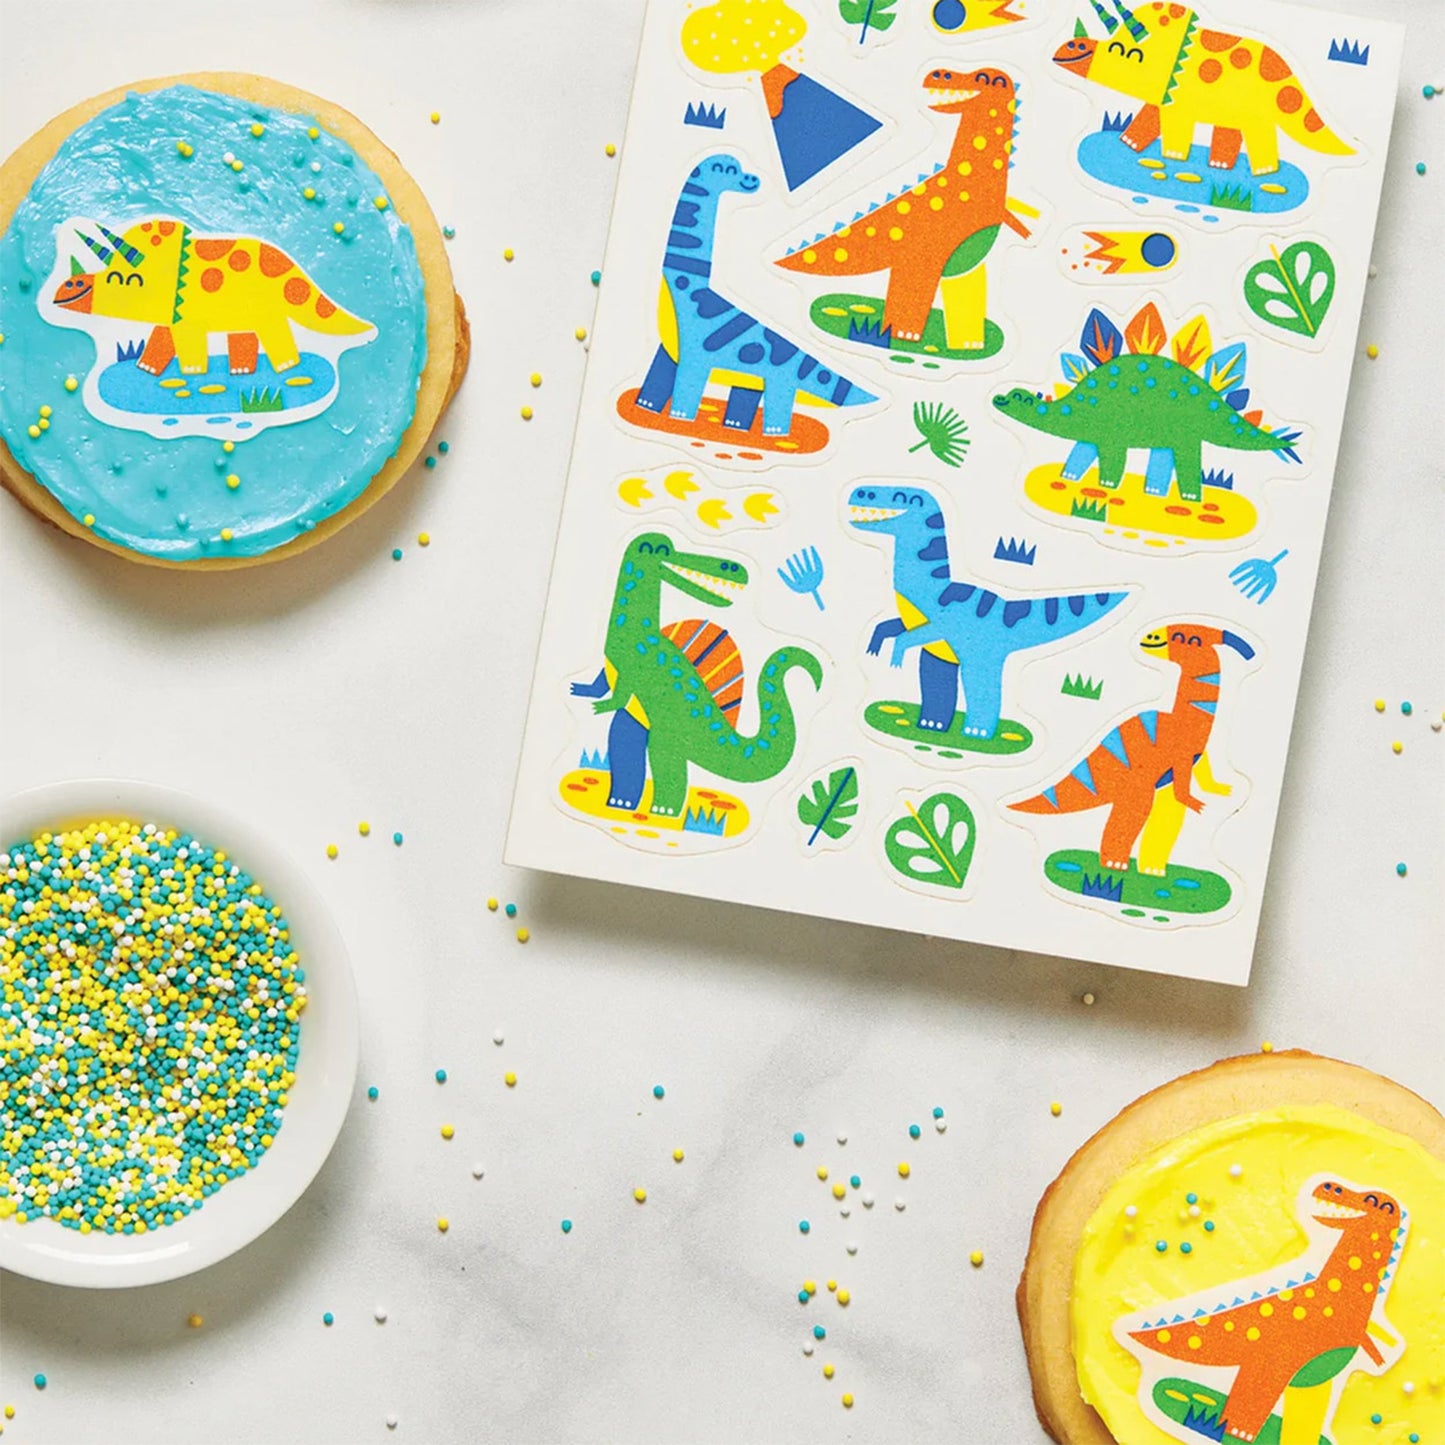 Little Dinosaurs Edible Stickers